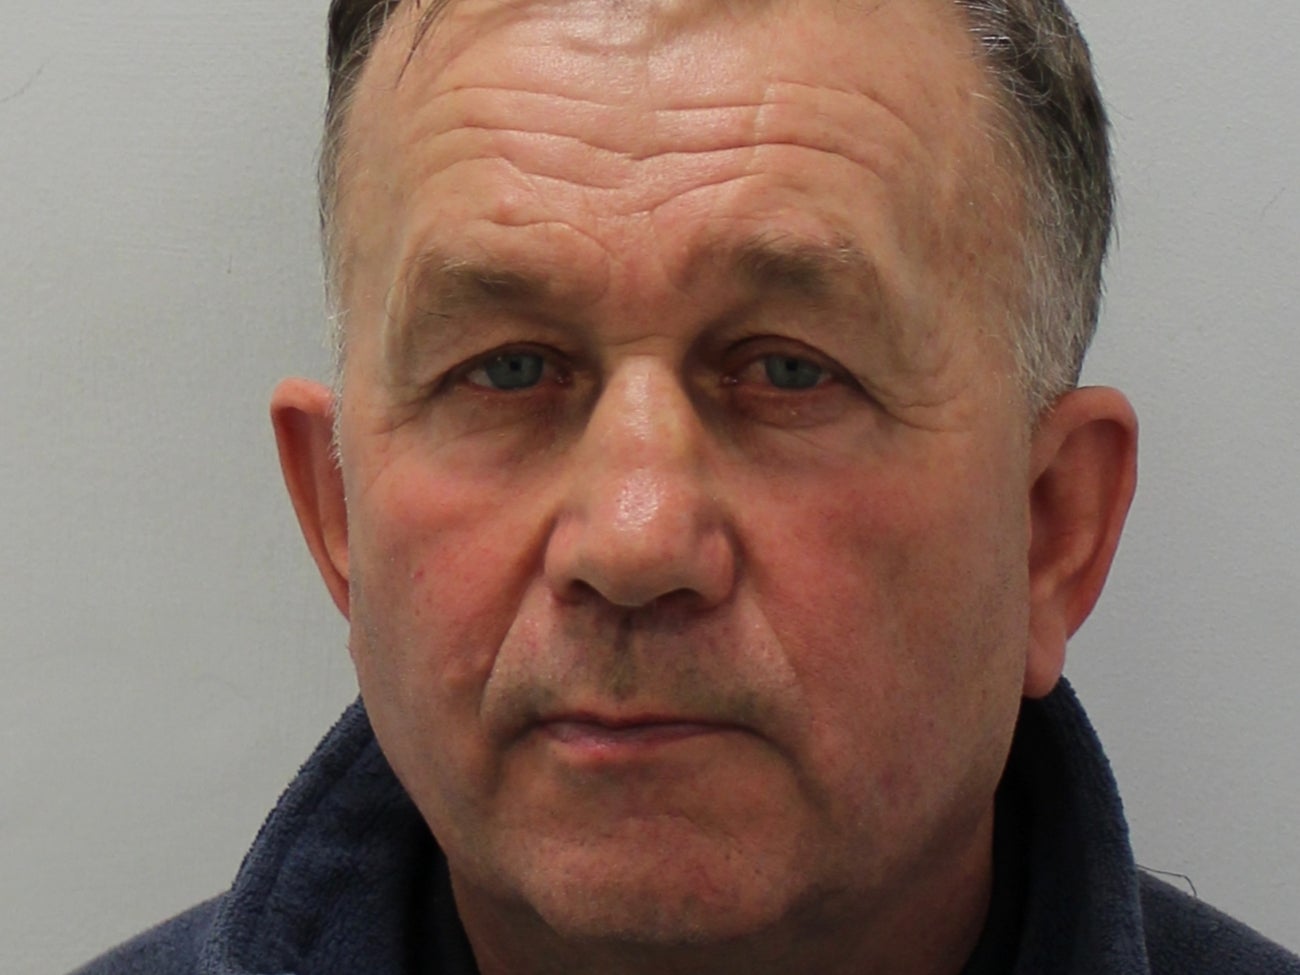 David Hughes was convicted of 14 offences at Croydon Crown Court